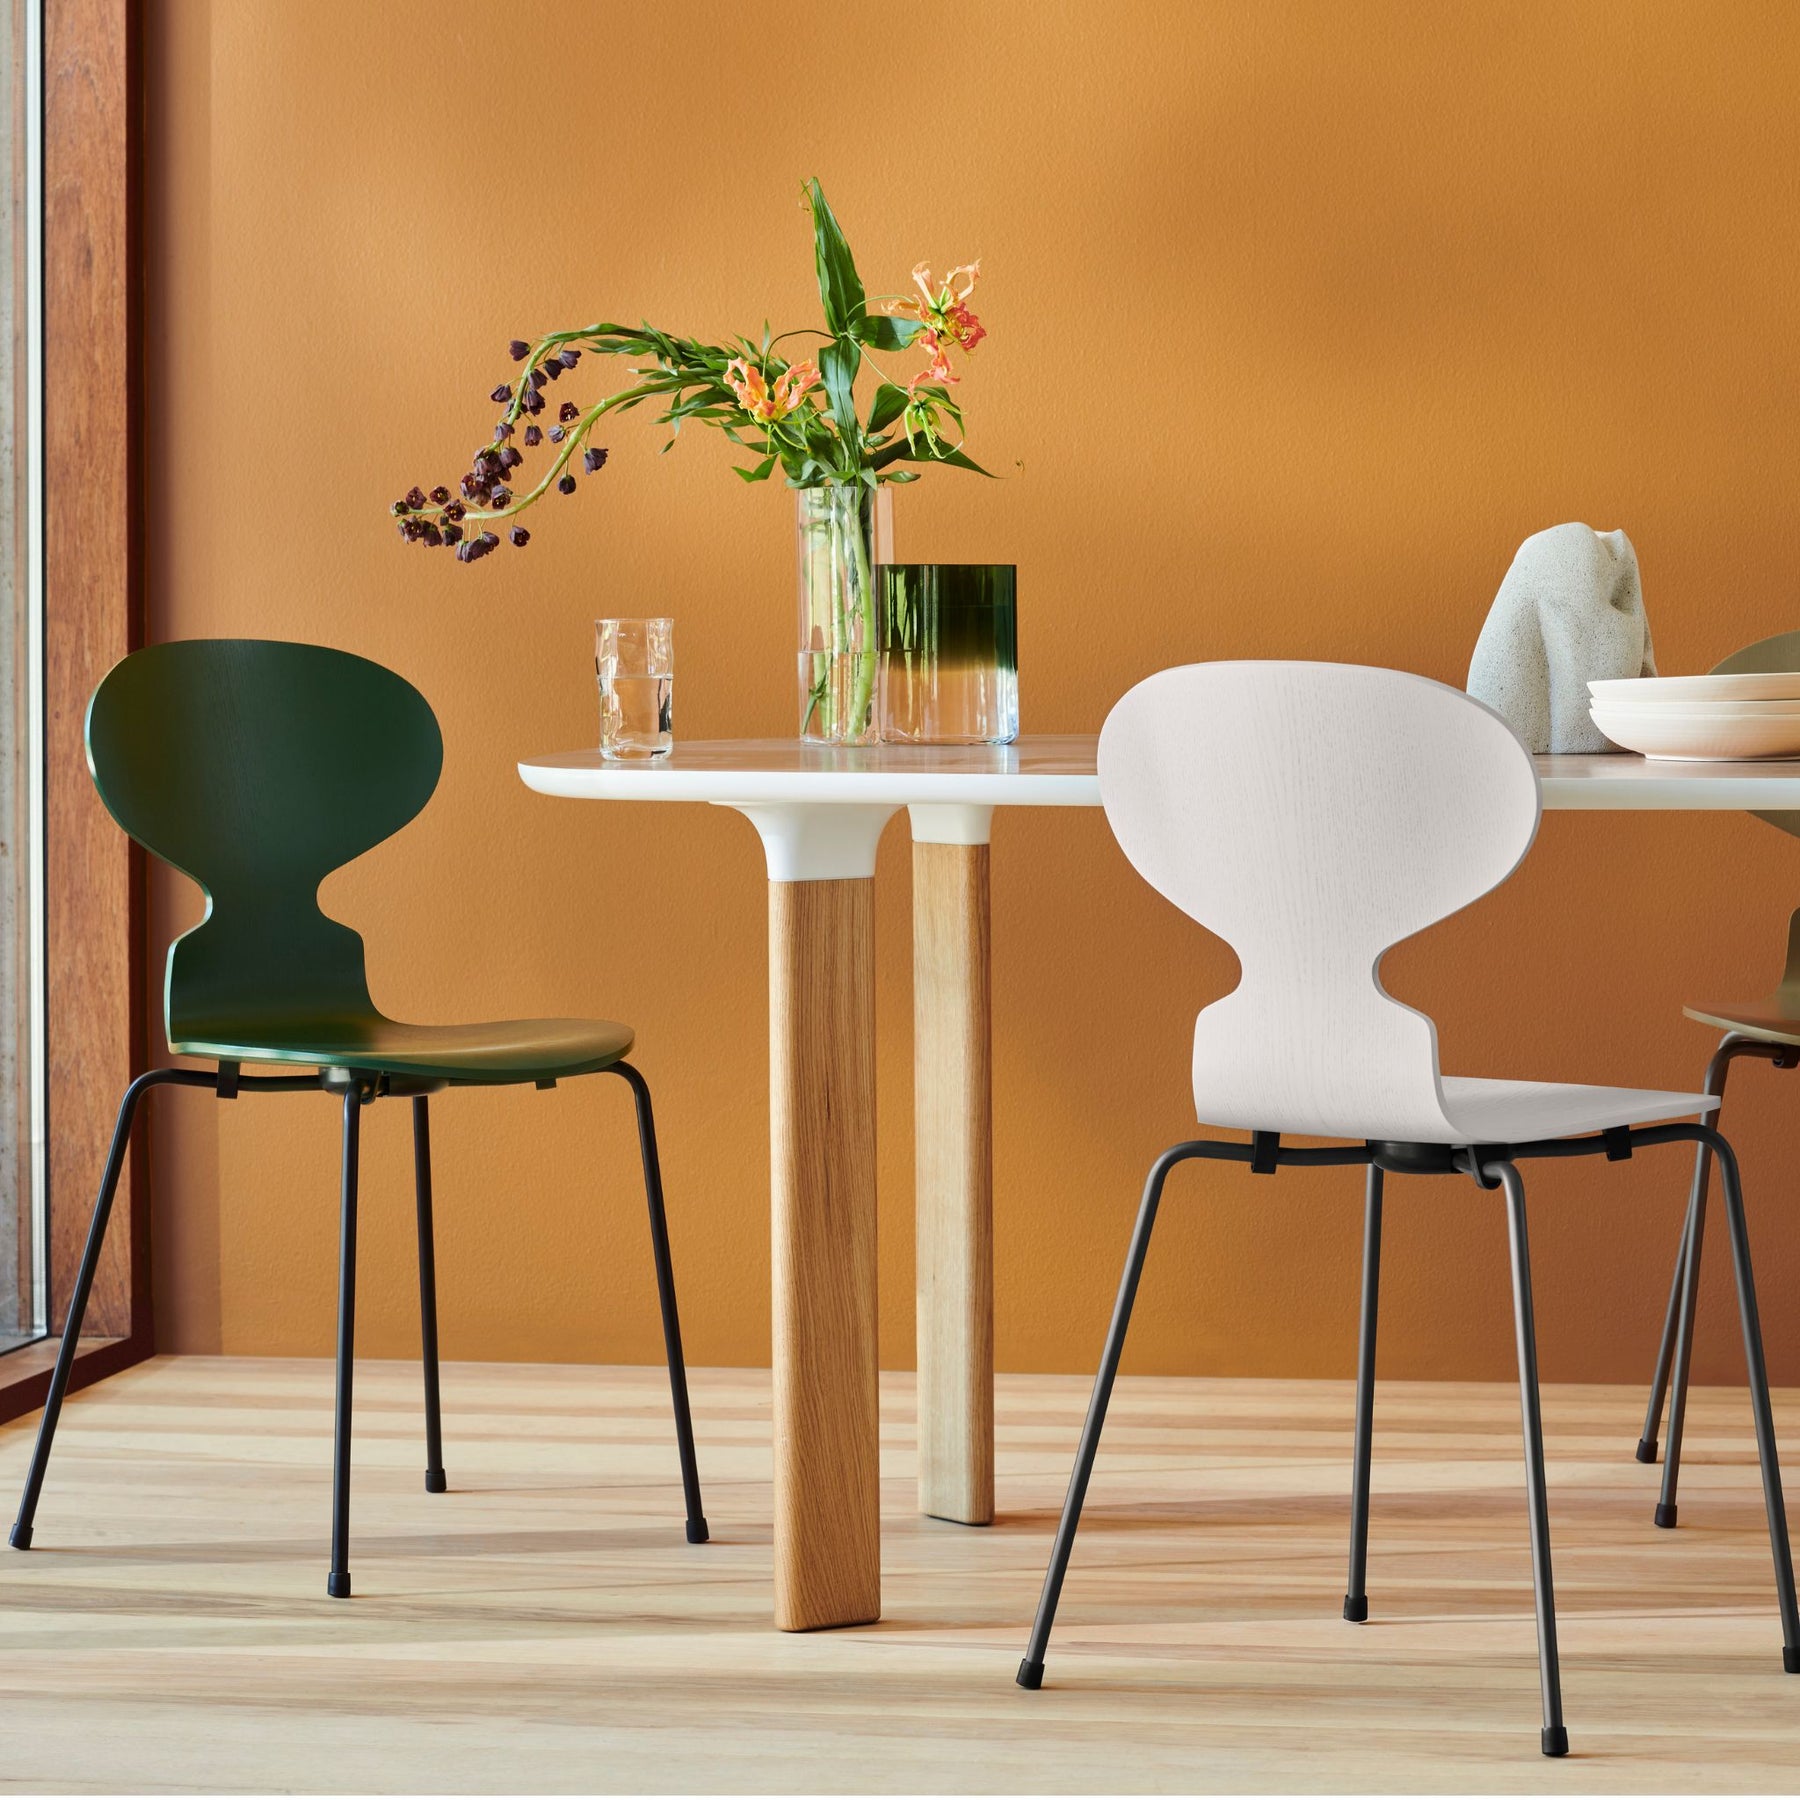 Fritz Hansen Ant Chairs Evergreen and White in Dining Room with Analog Table